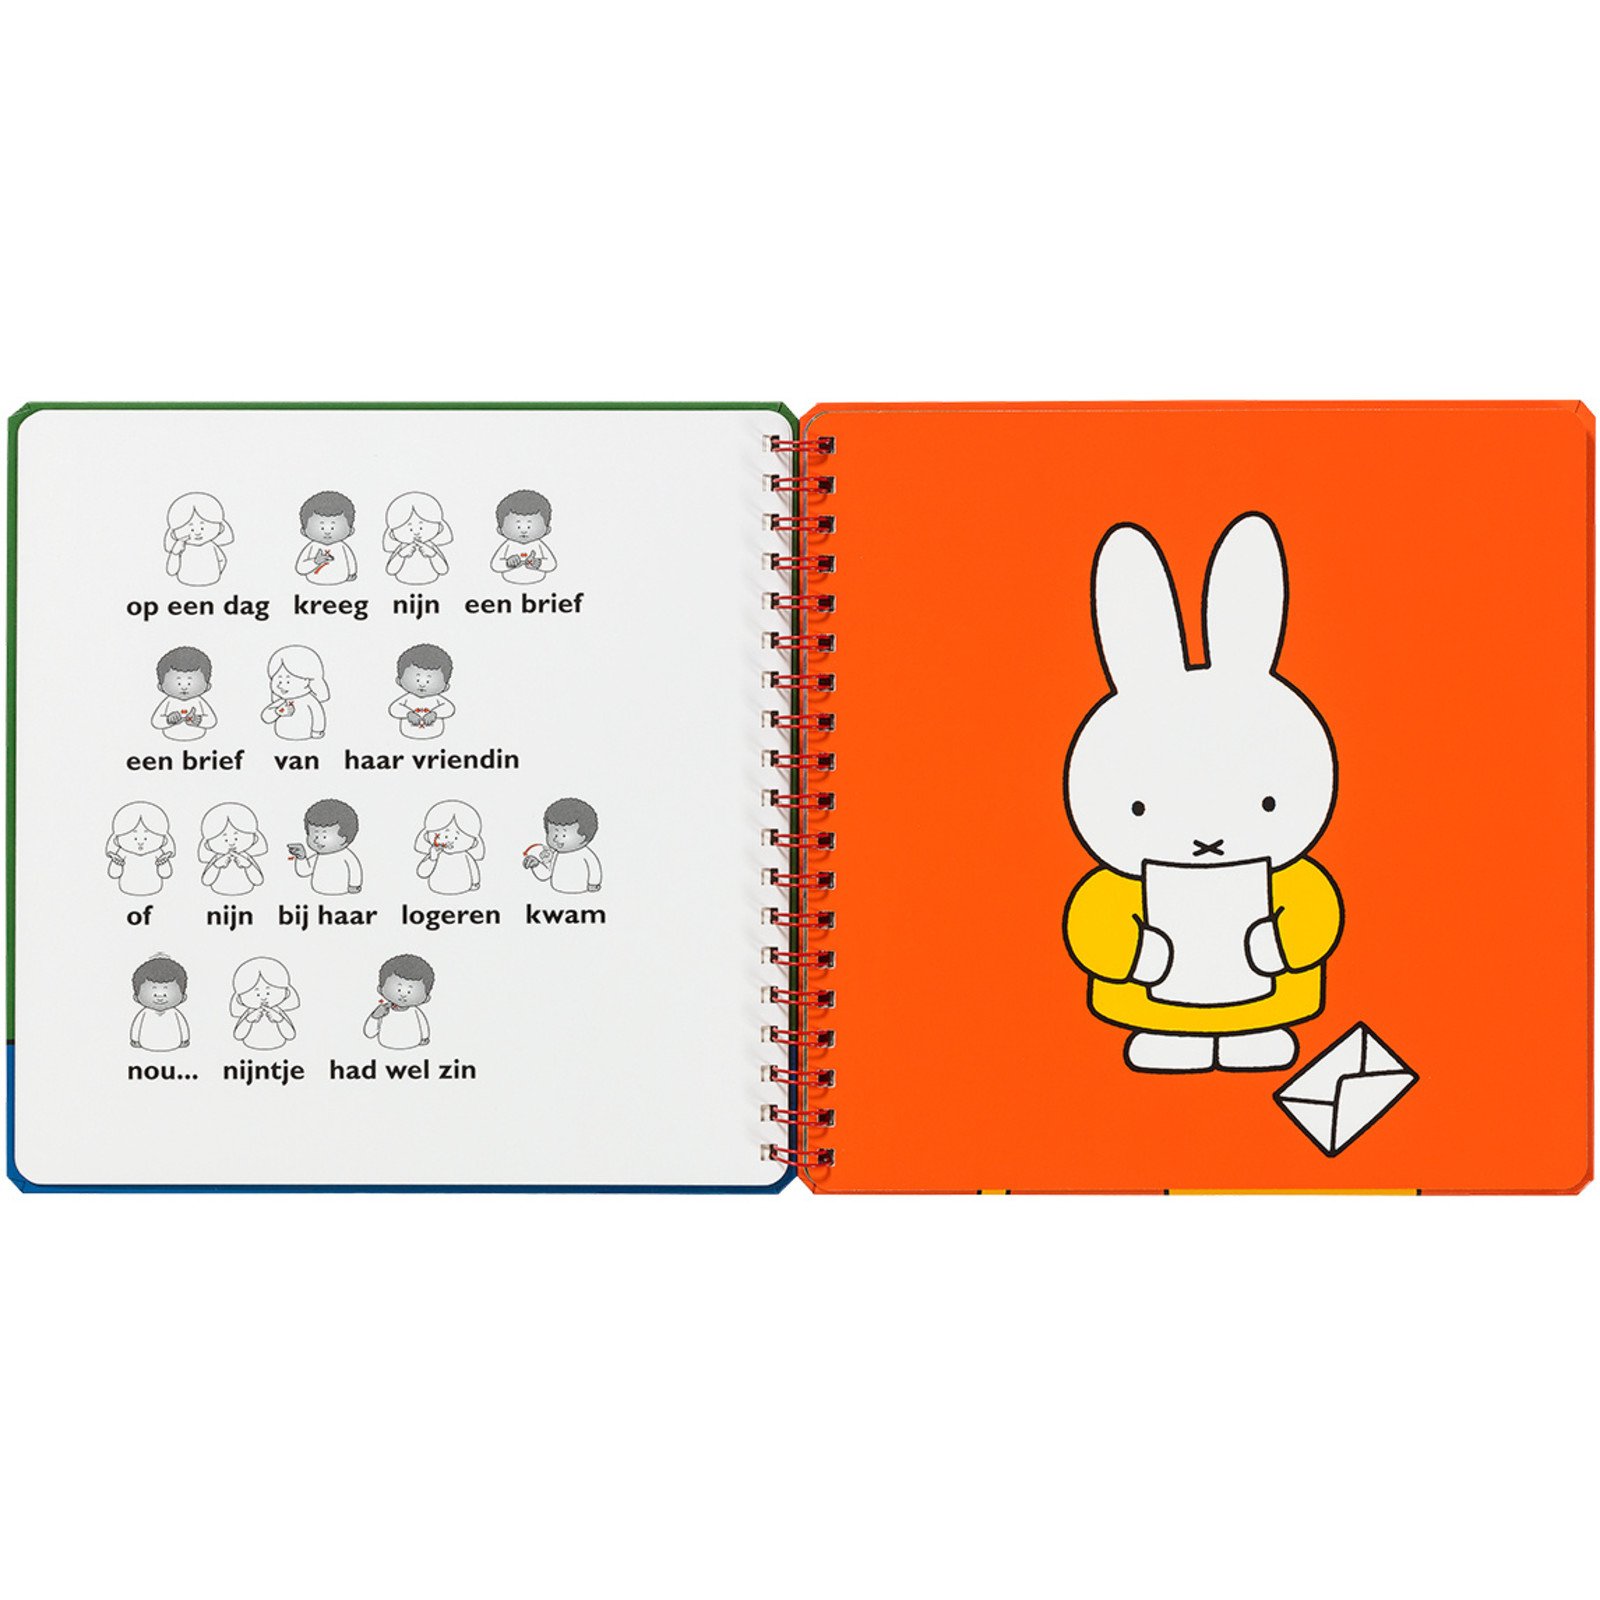 miffy is staying over (sign language book)